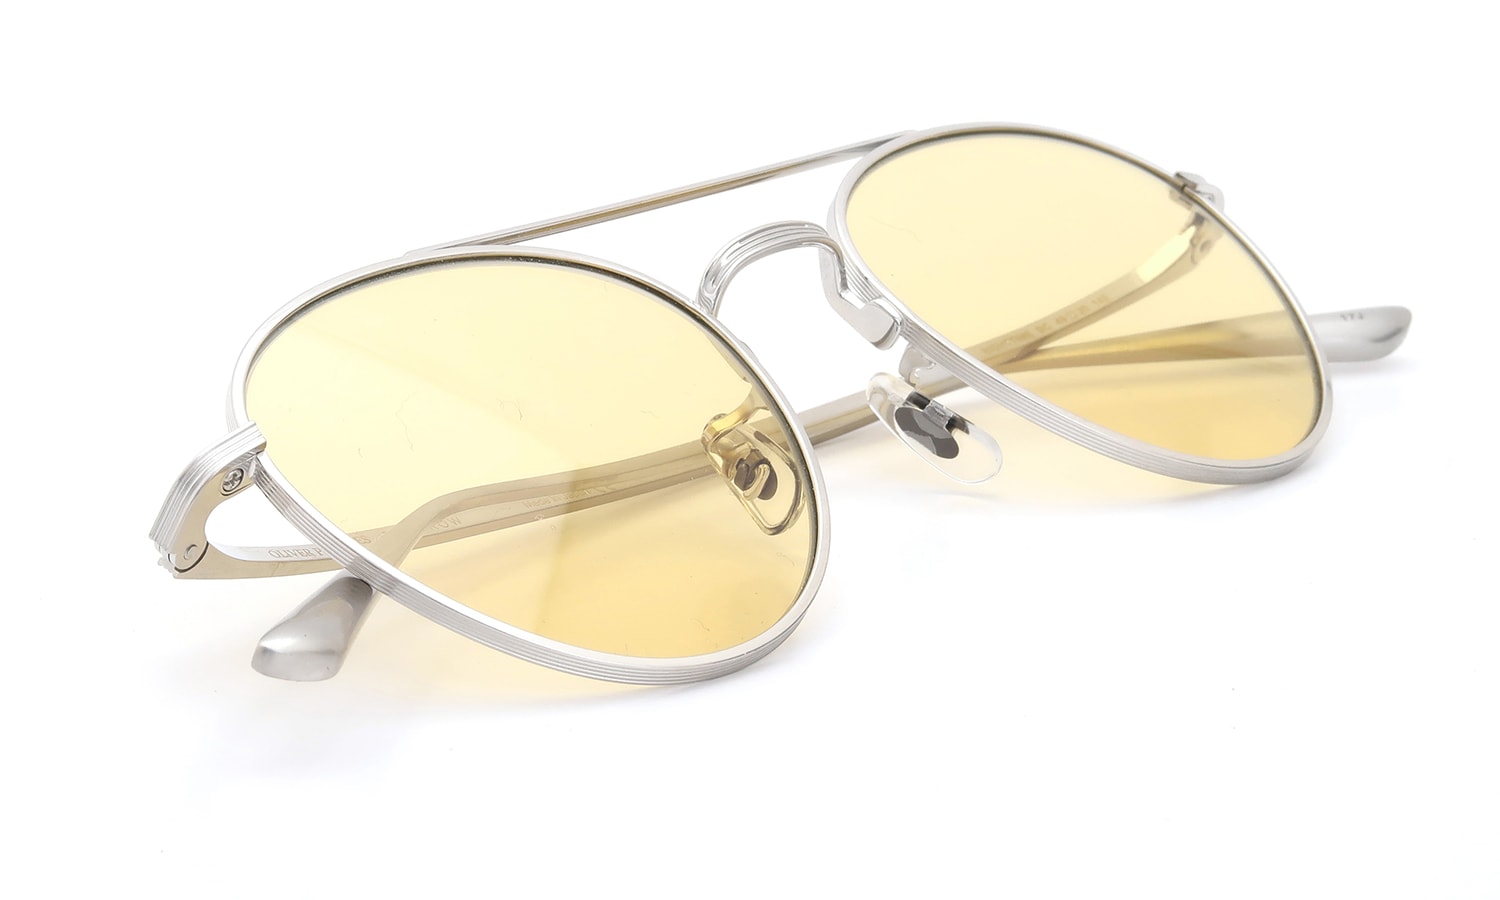 OLIVER PEOPLES×THE ROW NIGHTTIME BC